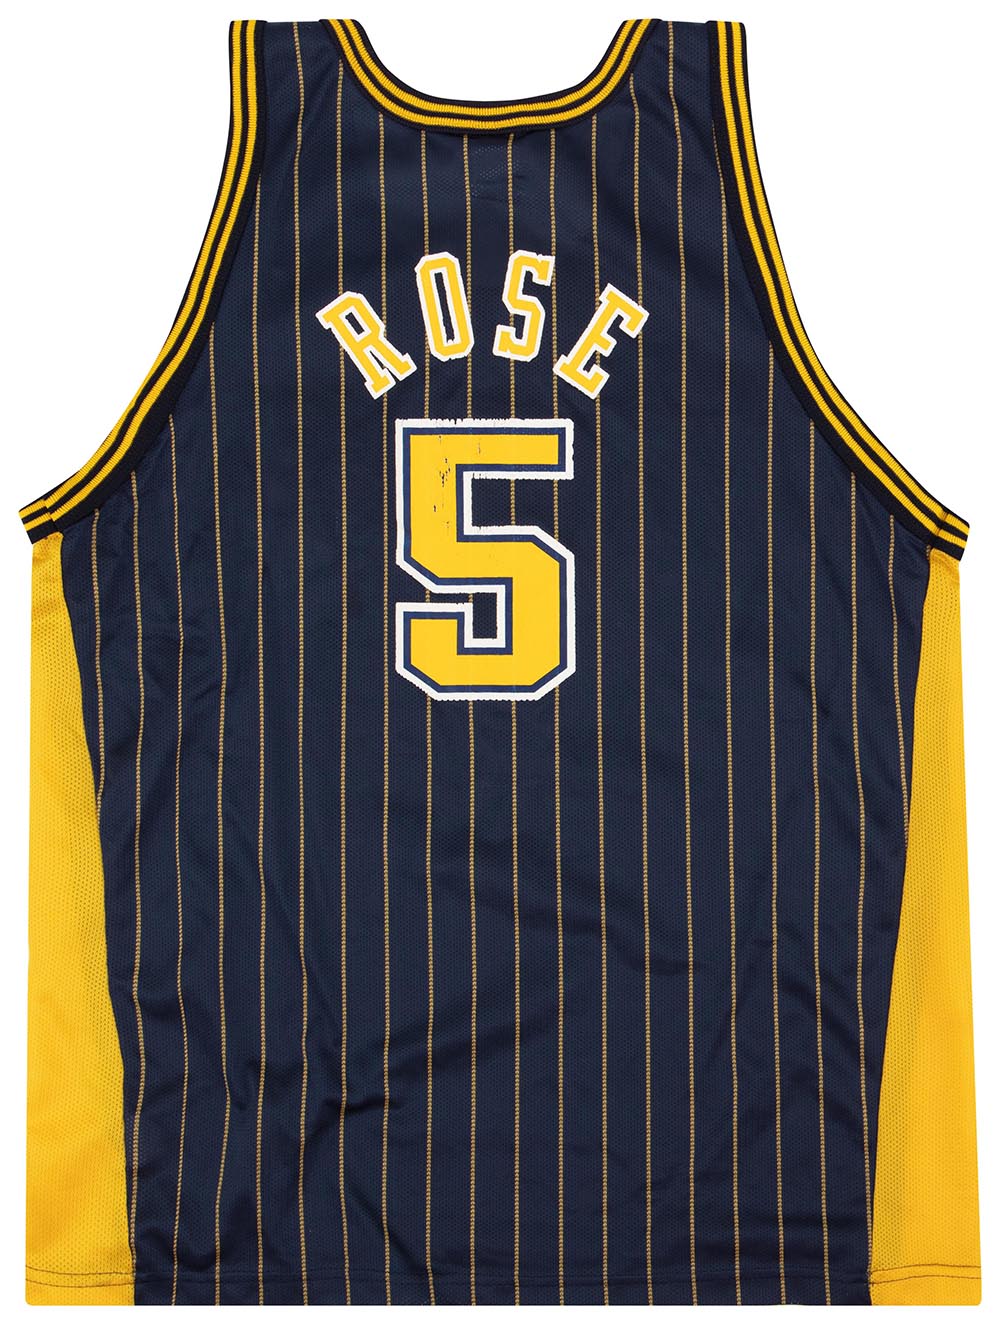 Adult Indiana Pacers Jalen Rose #5 Flo-Jo Hardwood Classic Jersey by  Mitchell and Ness